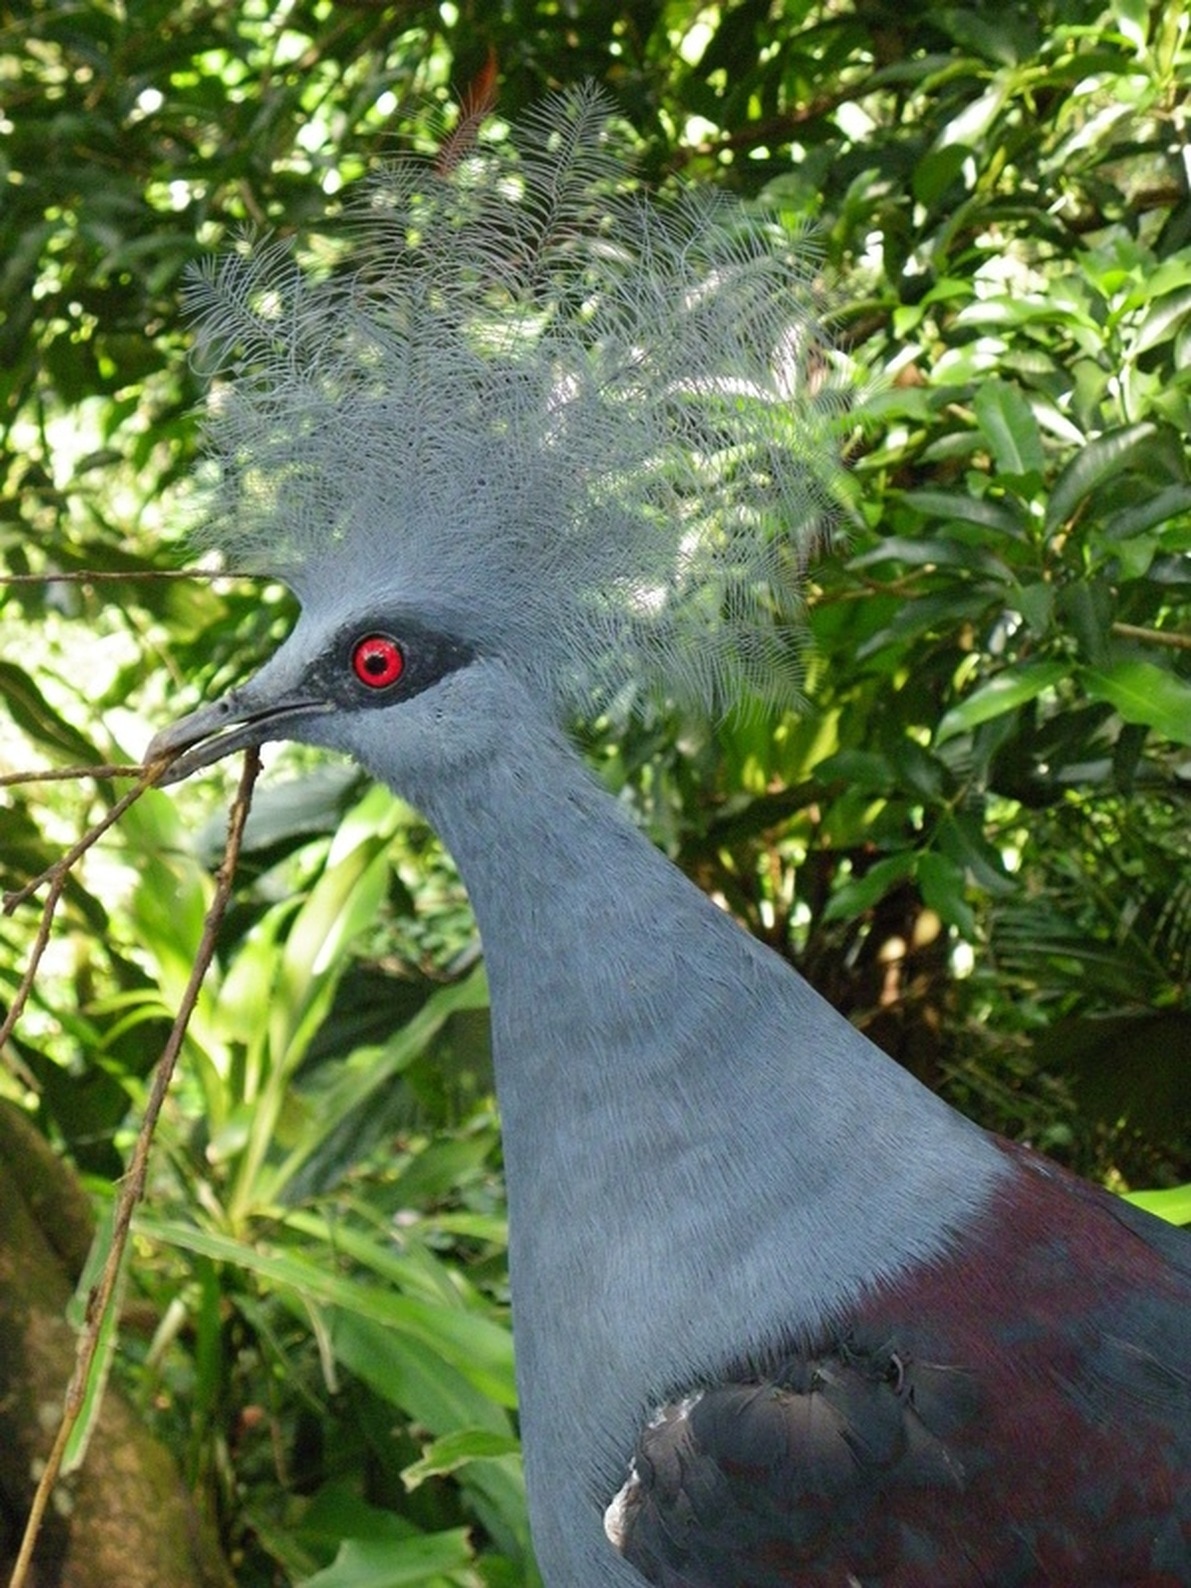 Western Crowned Pigeon, Common Crowned Pigeon or Blue Crowned Pigeon, Goura cristata, Fragile Forest, Singapore zoo